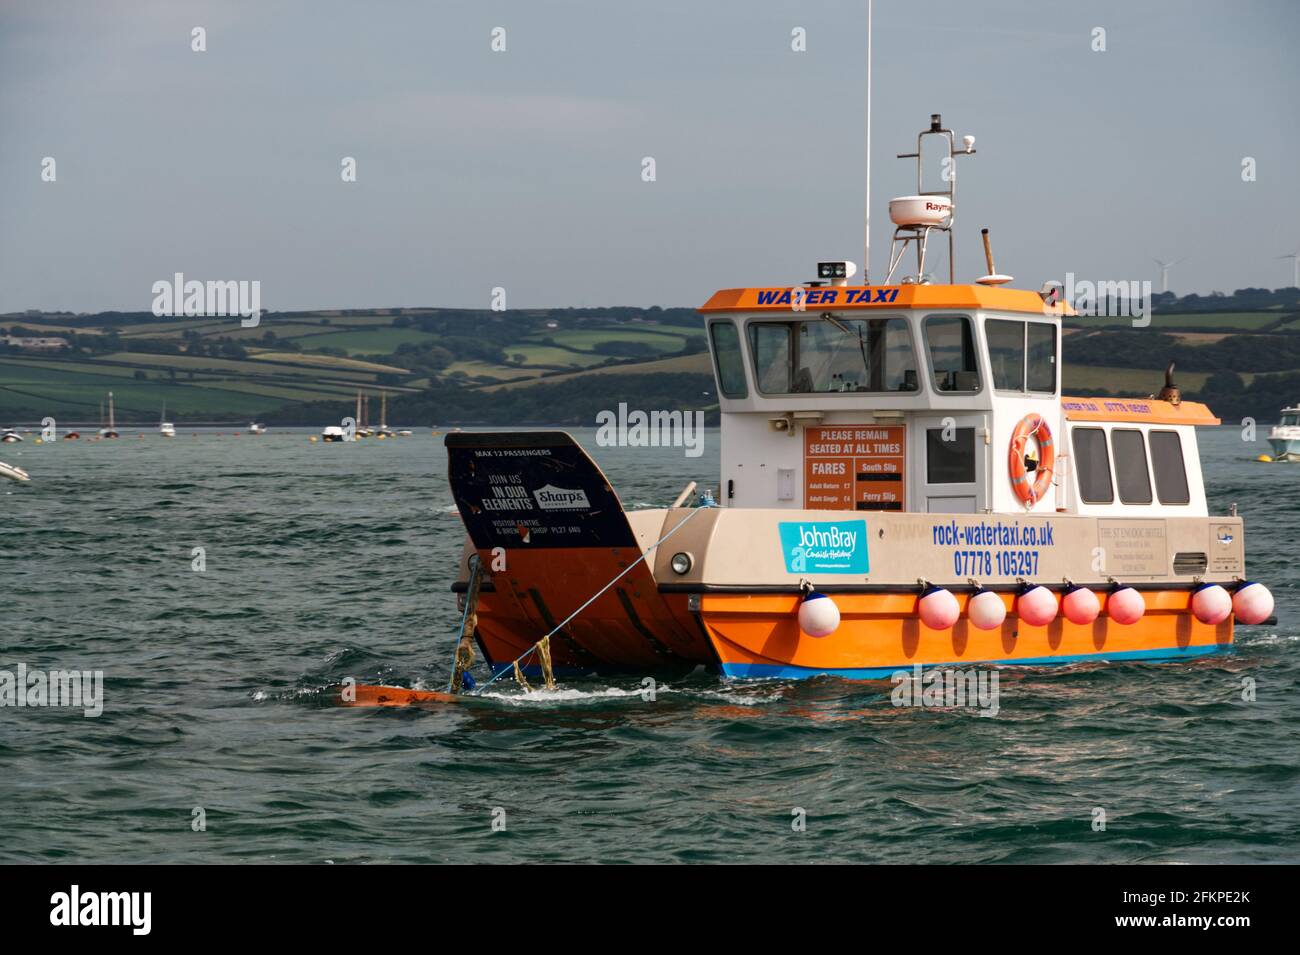 Passenger Ferry running from Padstow to Rock across the Camel estuary on the Cornish coastline. Stock Photo